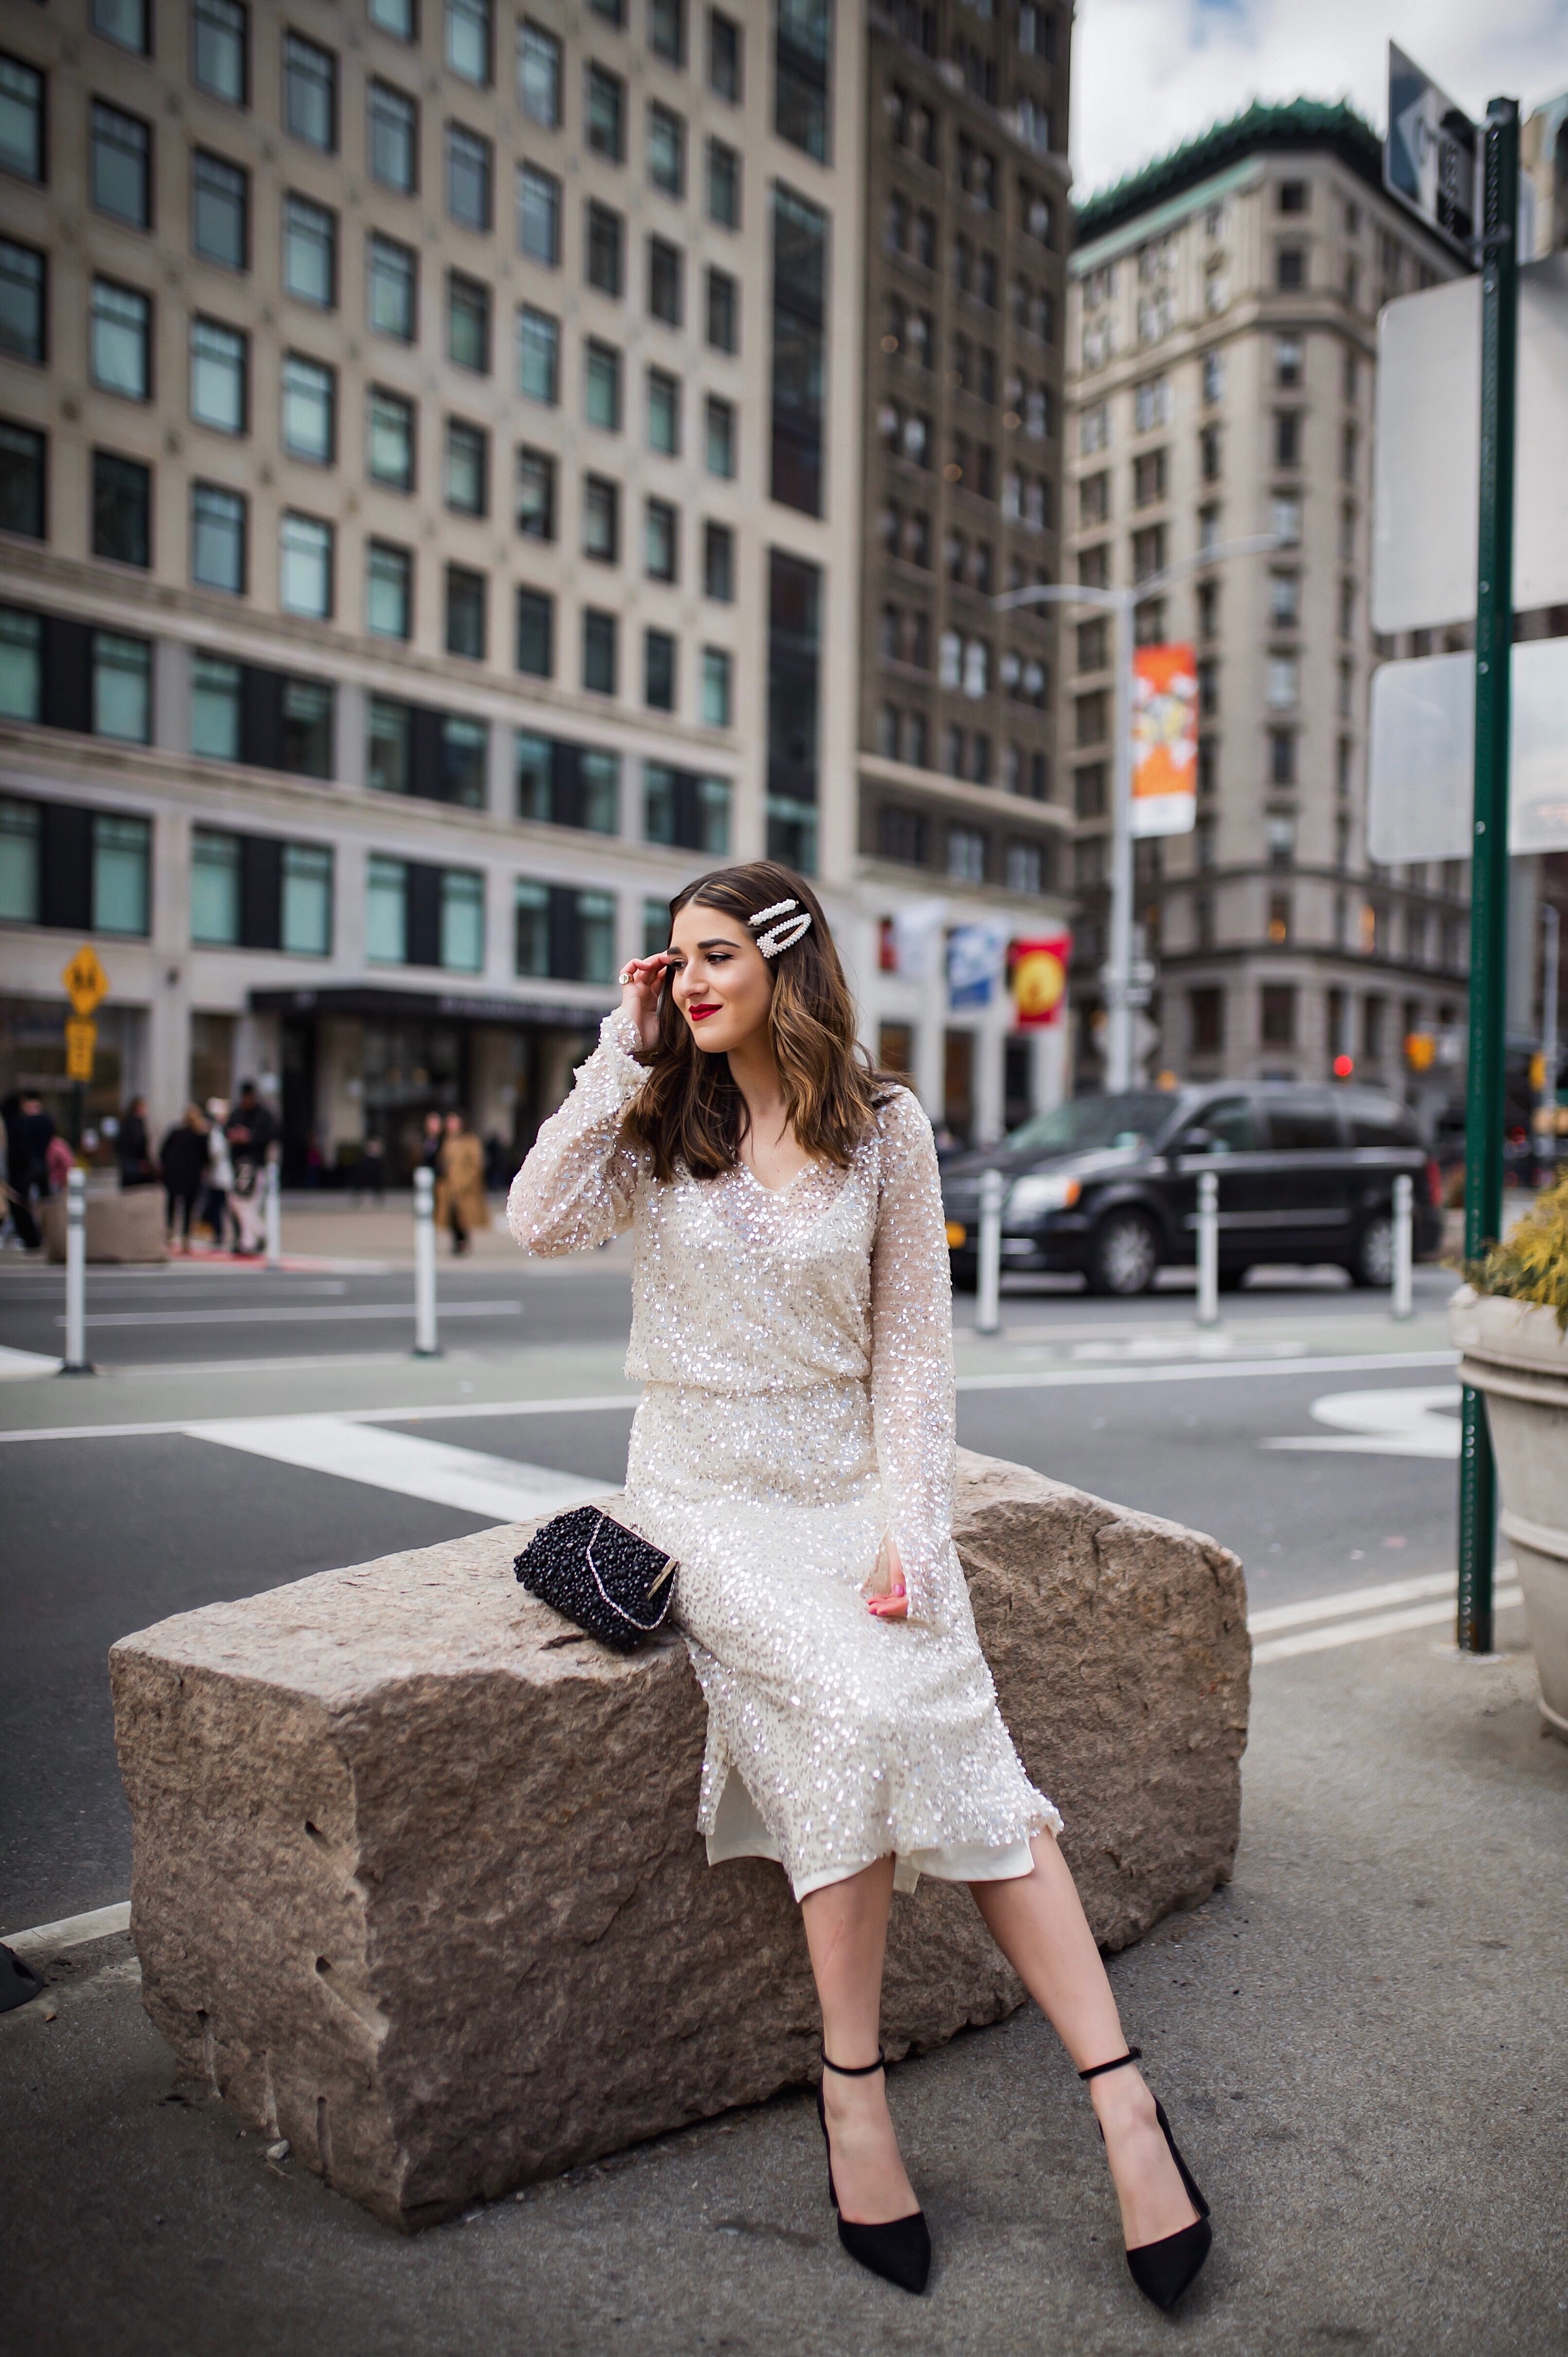 10 Ways To Be An Amazing Houseguest Sequined Midi Dress Black Heels Esther Santer Fashion Blog NYC Street Style Blogger Outfit OOTD Trendy Shopping Girl What How To  Wear Beaded Clutch Pearl Hair Clips Zara Asos Taxi Shot Photoshoot Inspo Bag Pretty.JPG